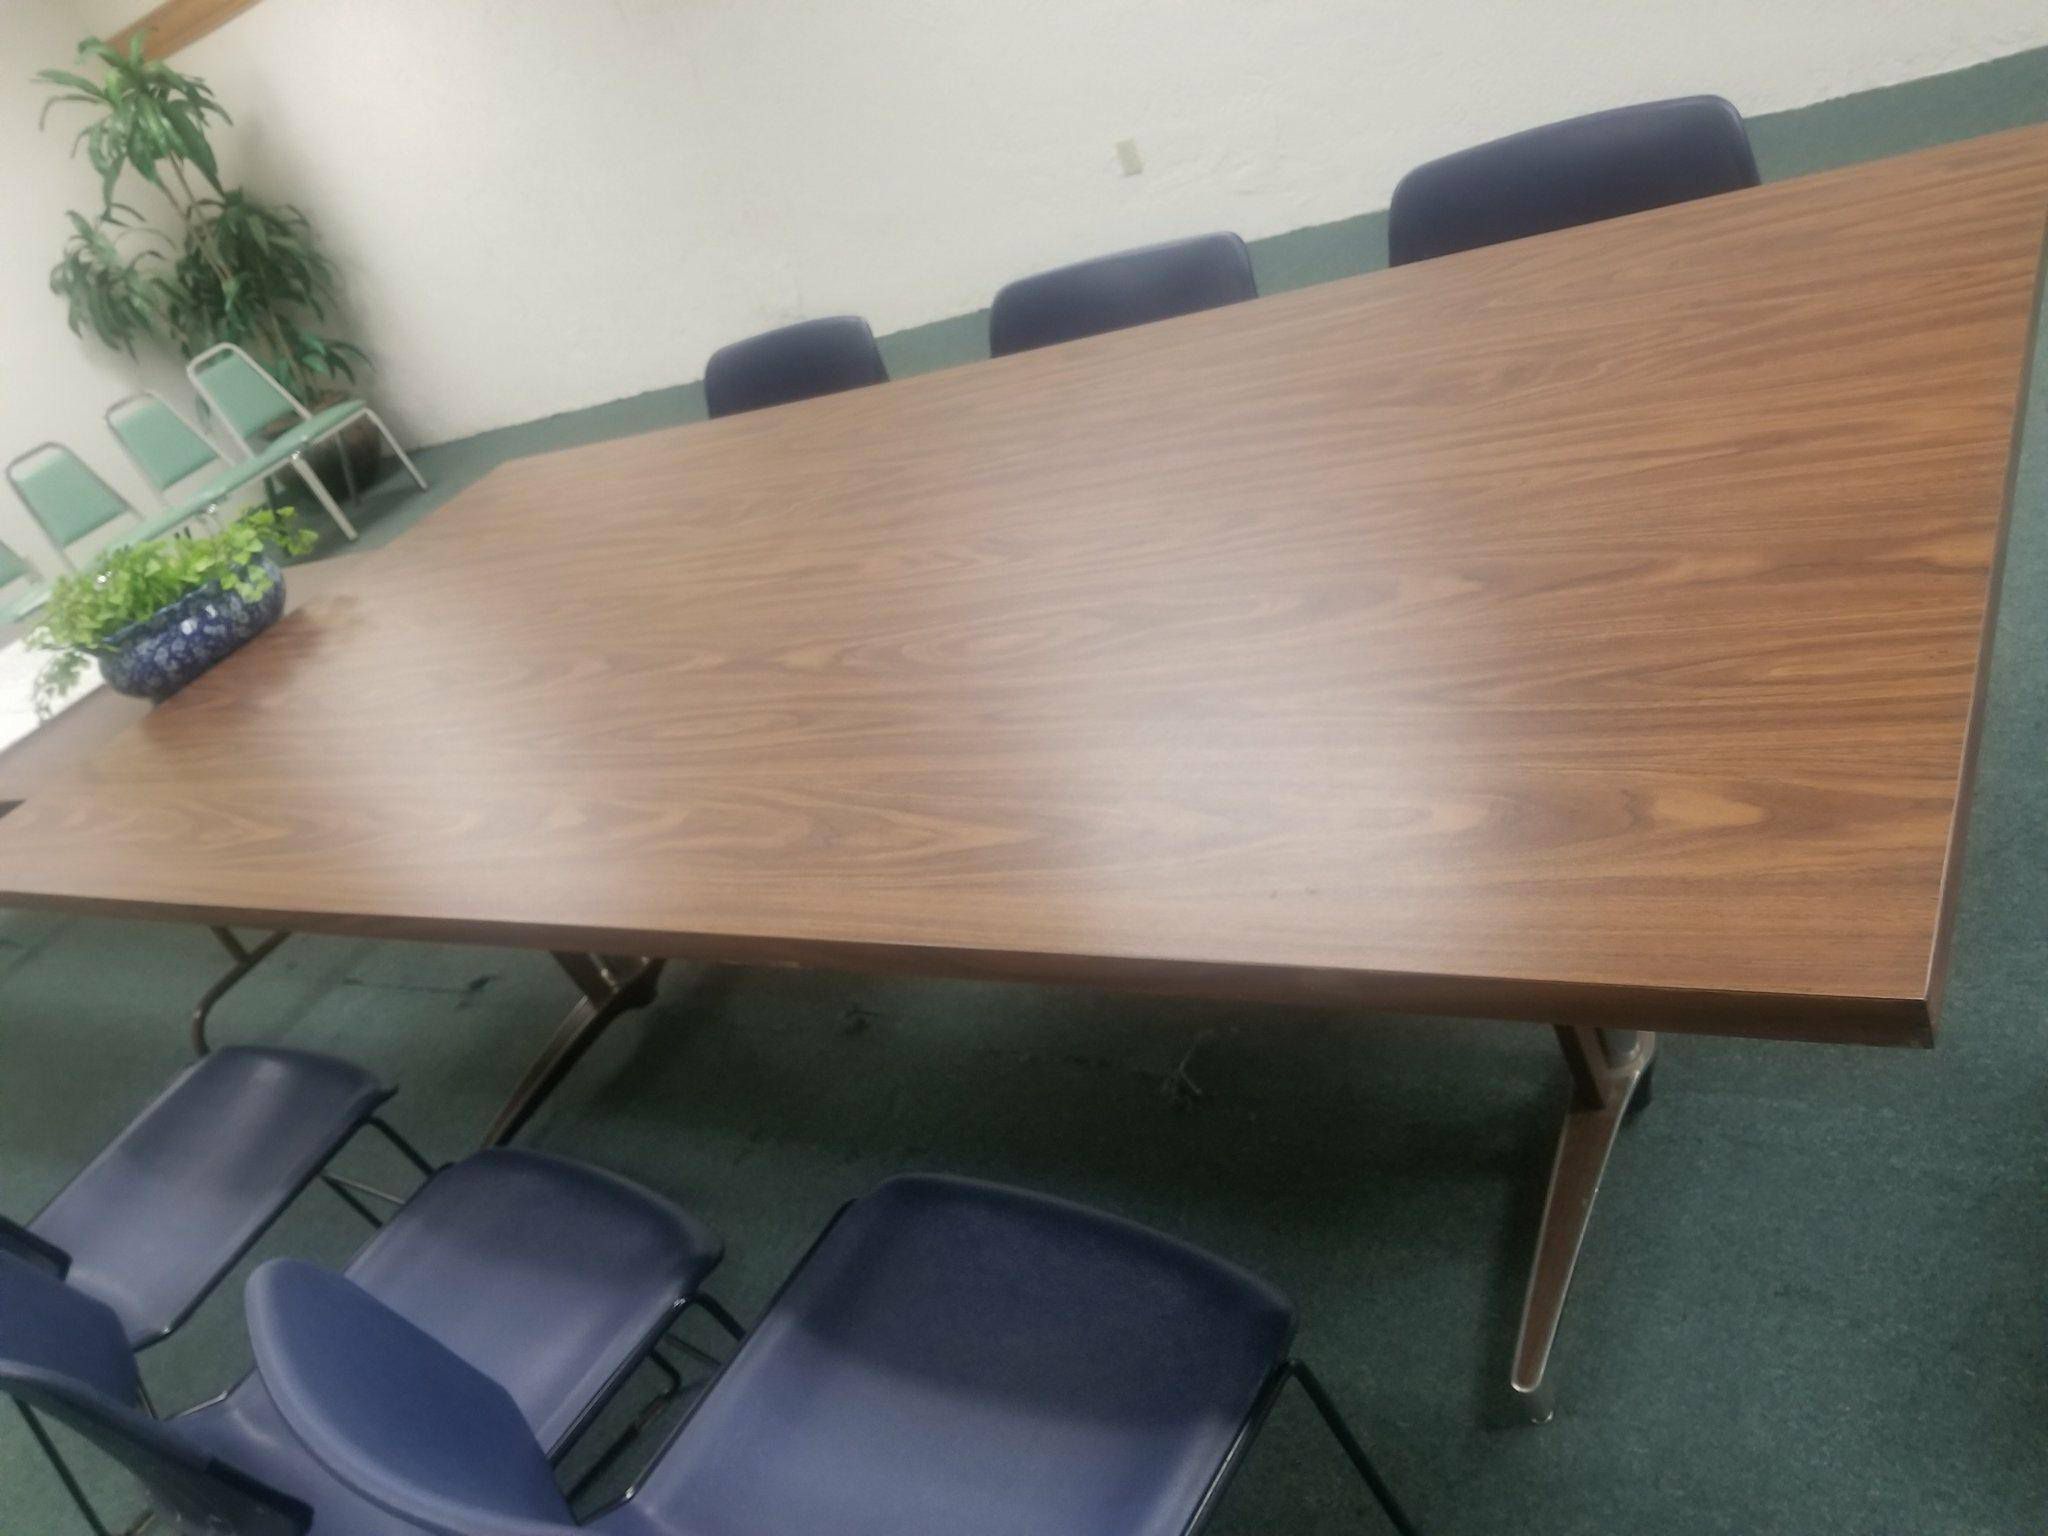 Large meeting tables